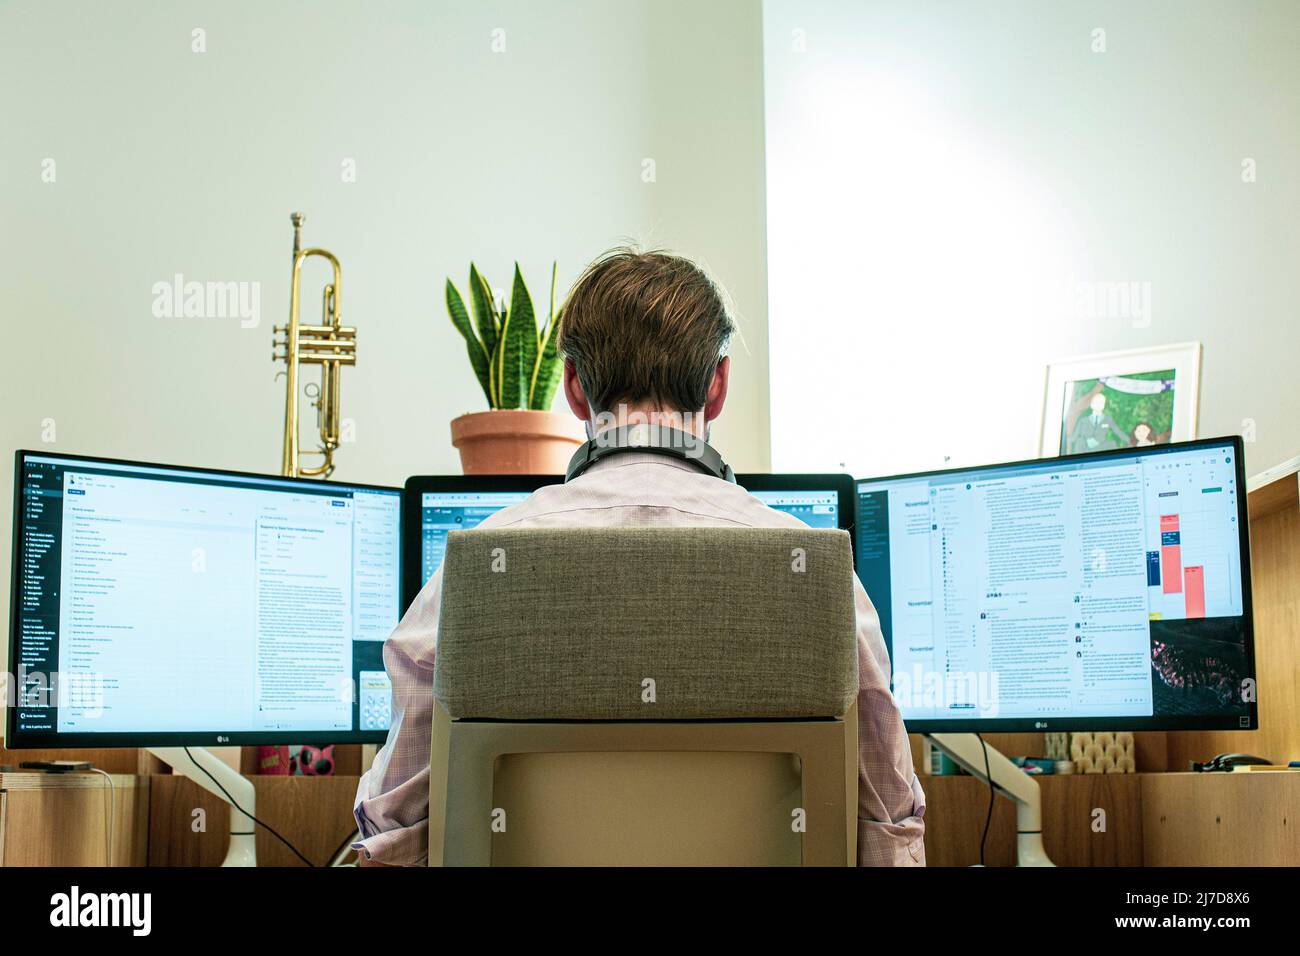 casual young man with headset using computer in a office. Back view. Stock Photo